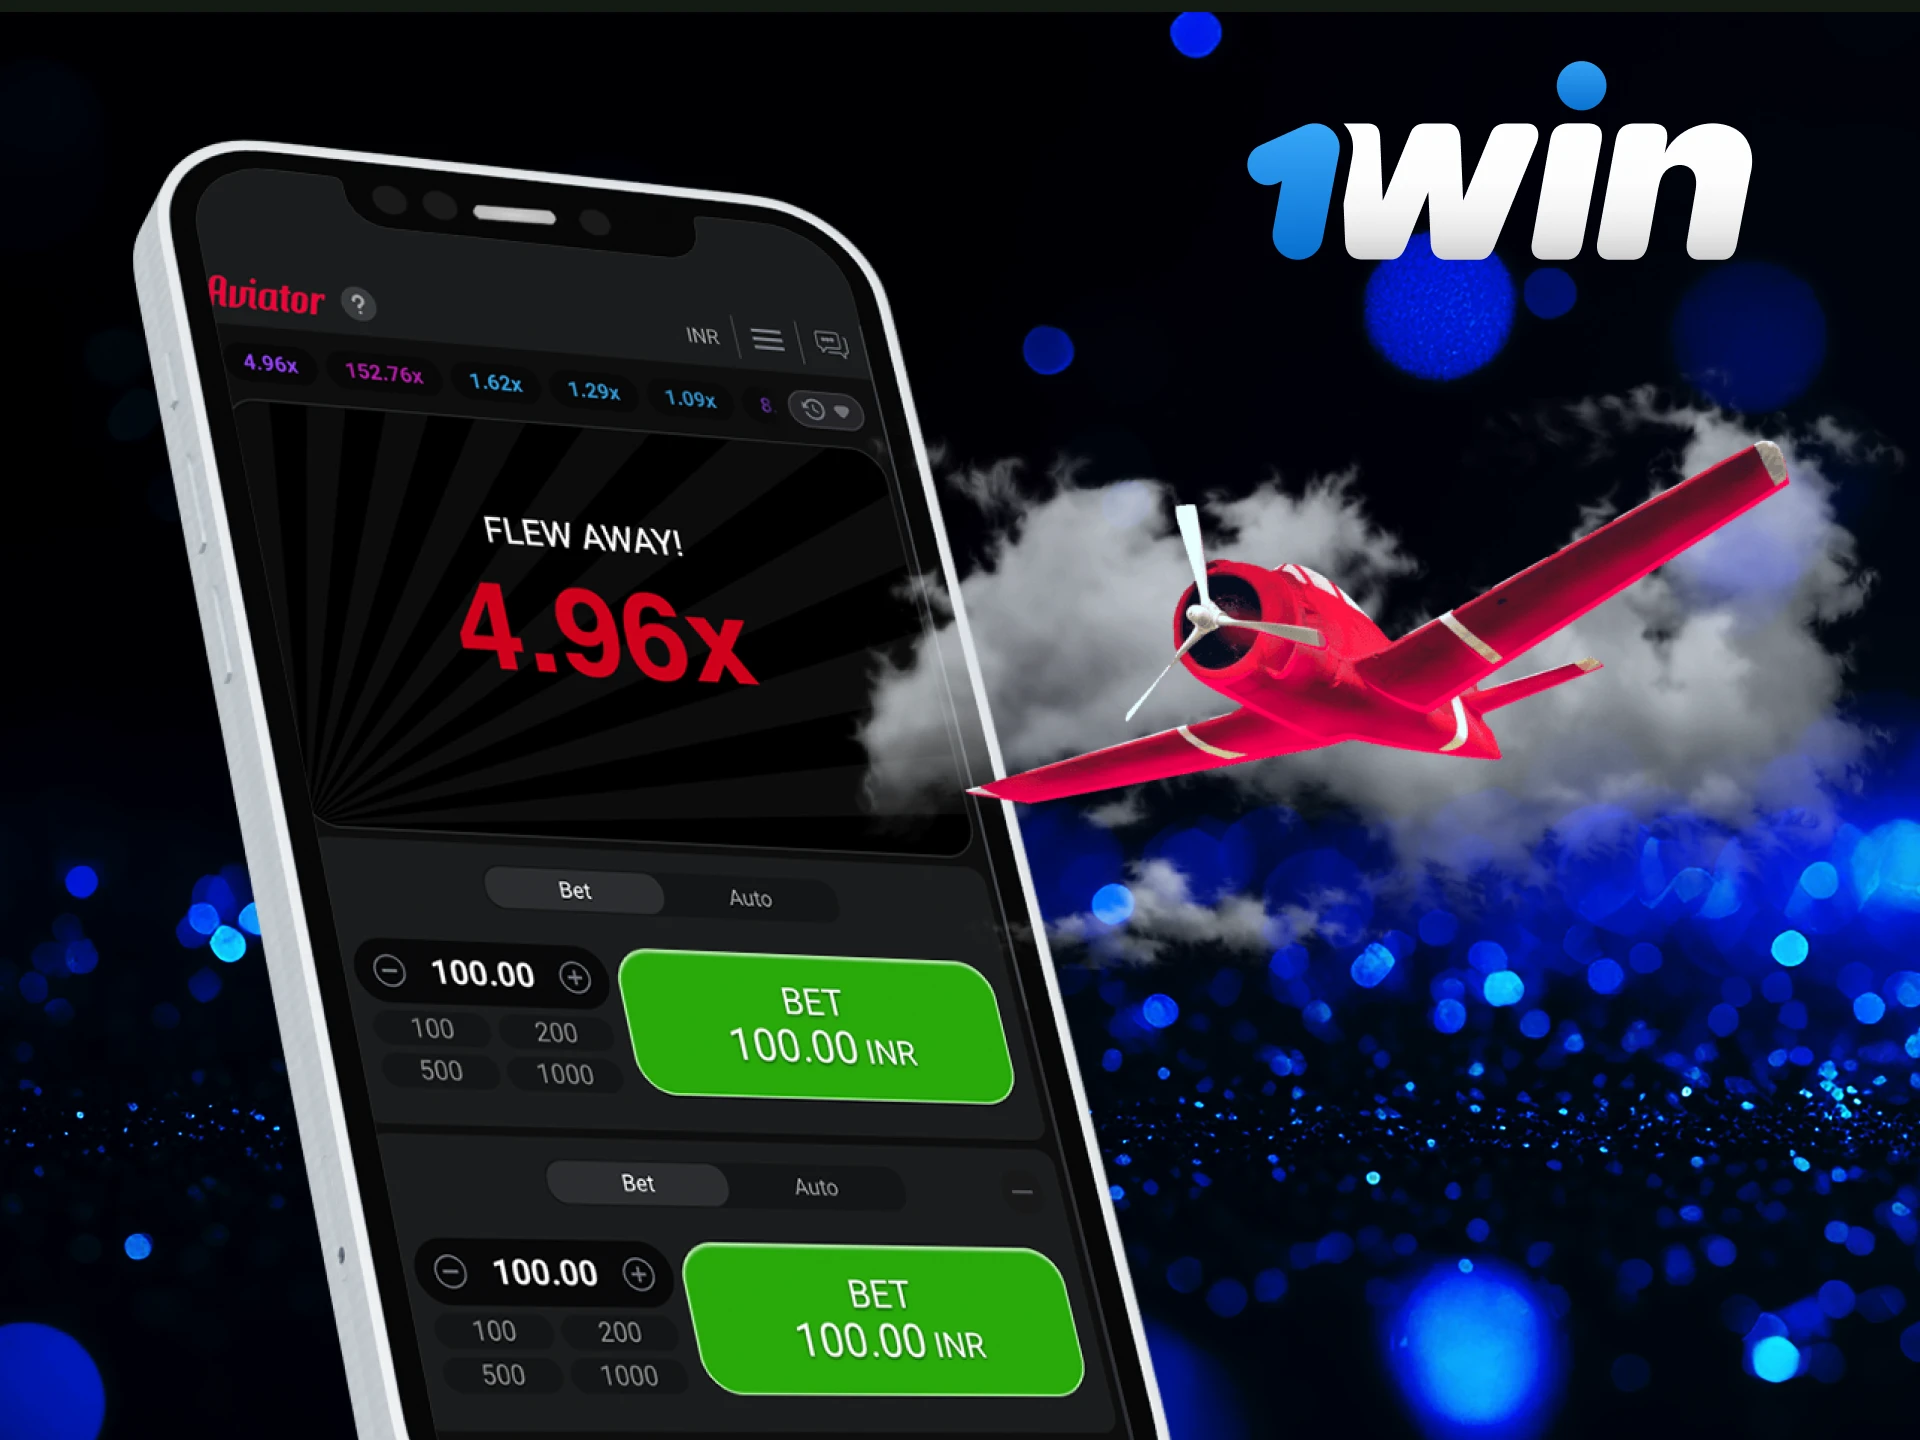 What are the advantages of the 1Win casino mobile application for the Aviator game.